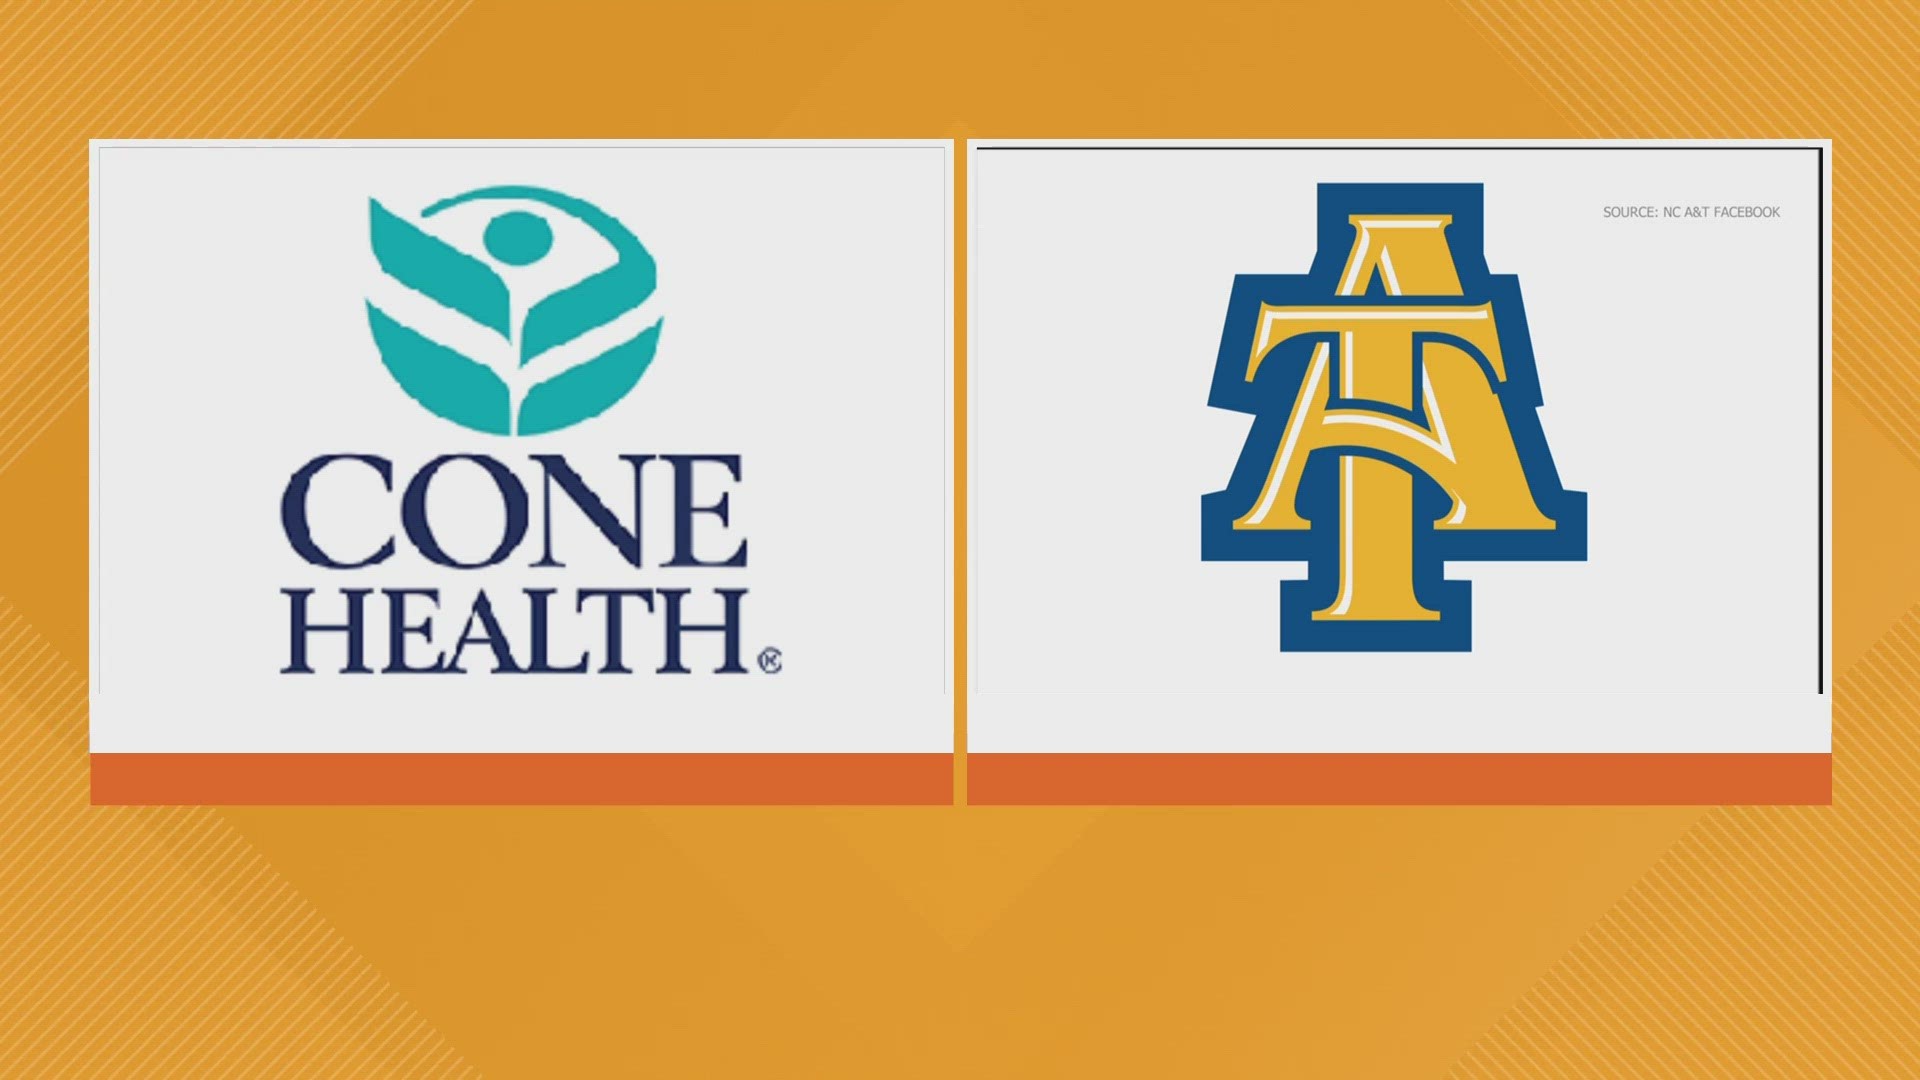 Cone Health is teaming up with North Carolina A&T at the newest urgent care coming to east Greensboro.